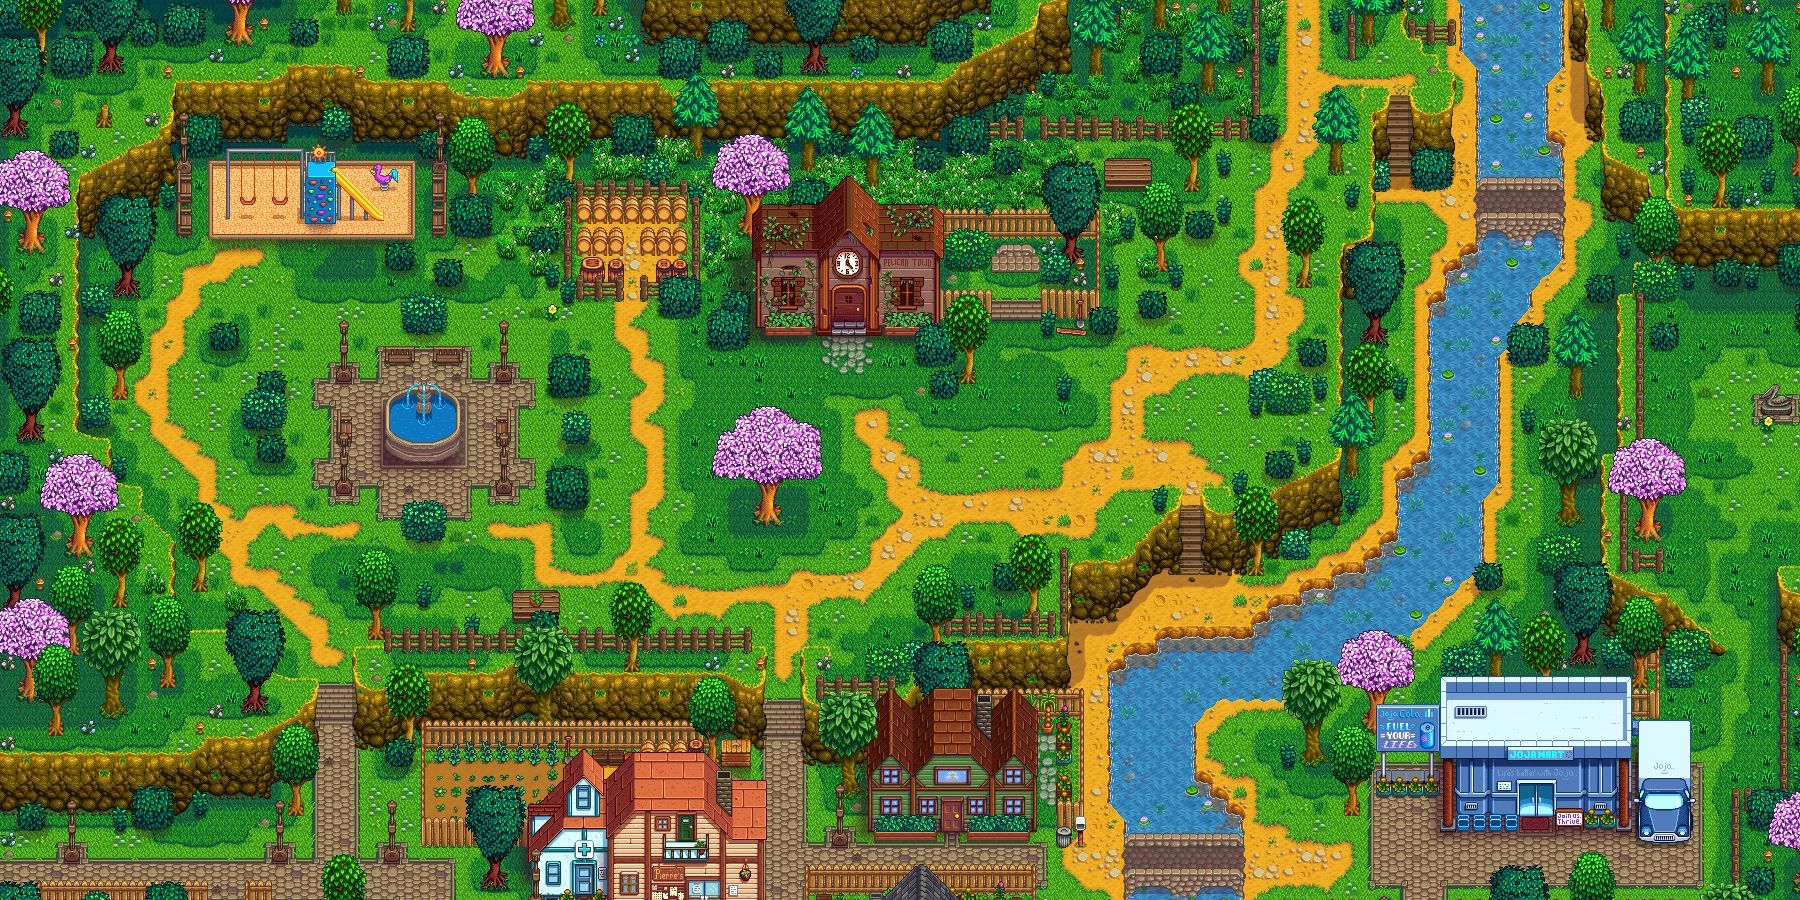 The View of Pelican Town in Stardew Valley